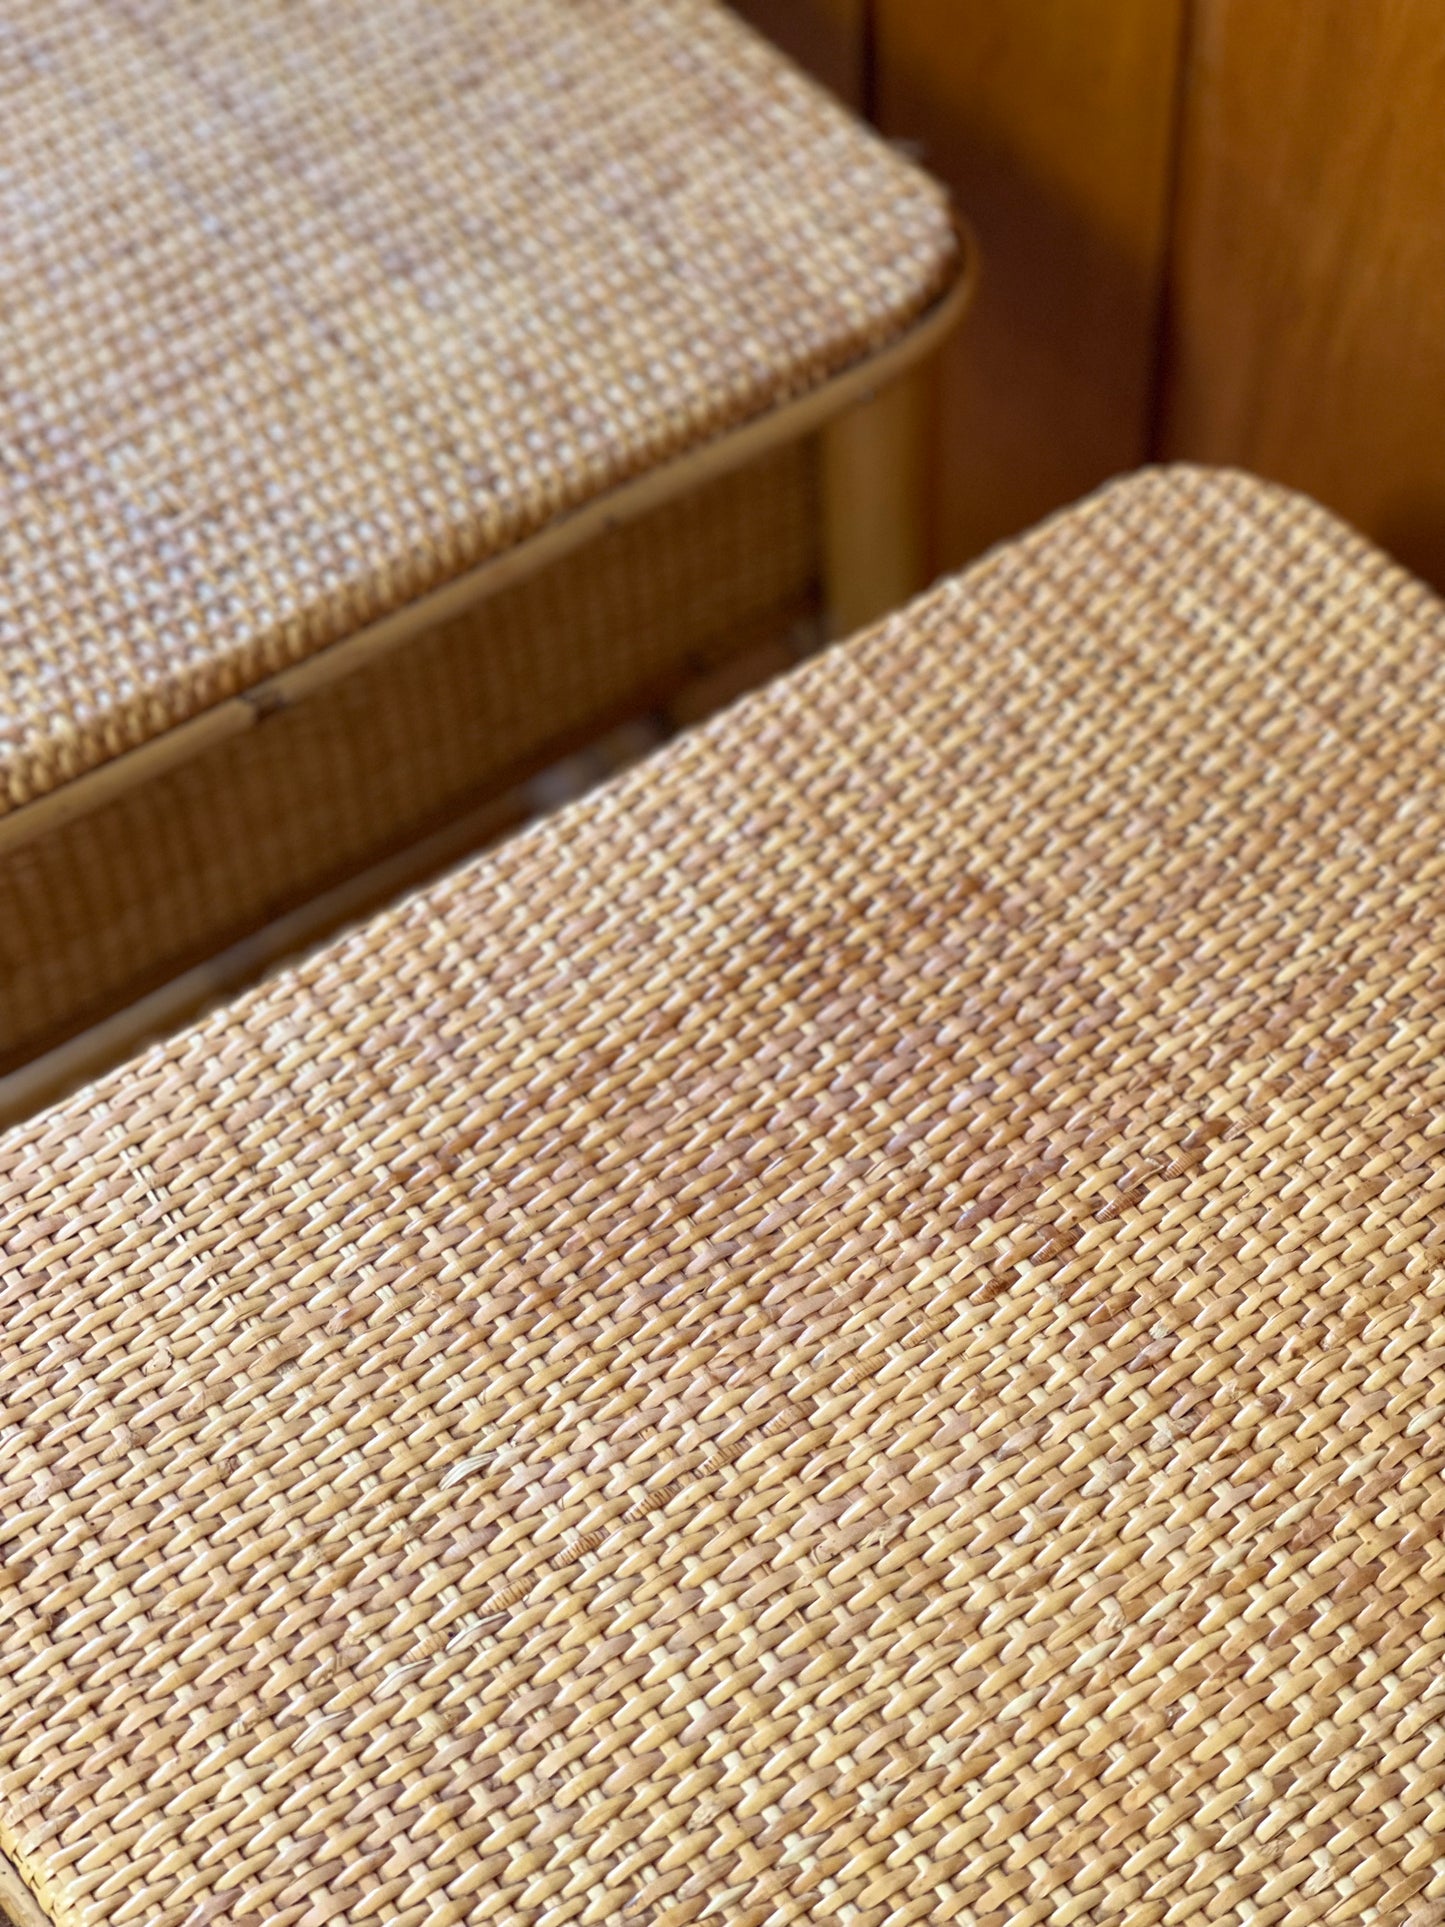 Pair of Rattan Side Tables